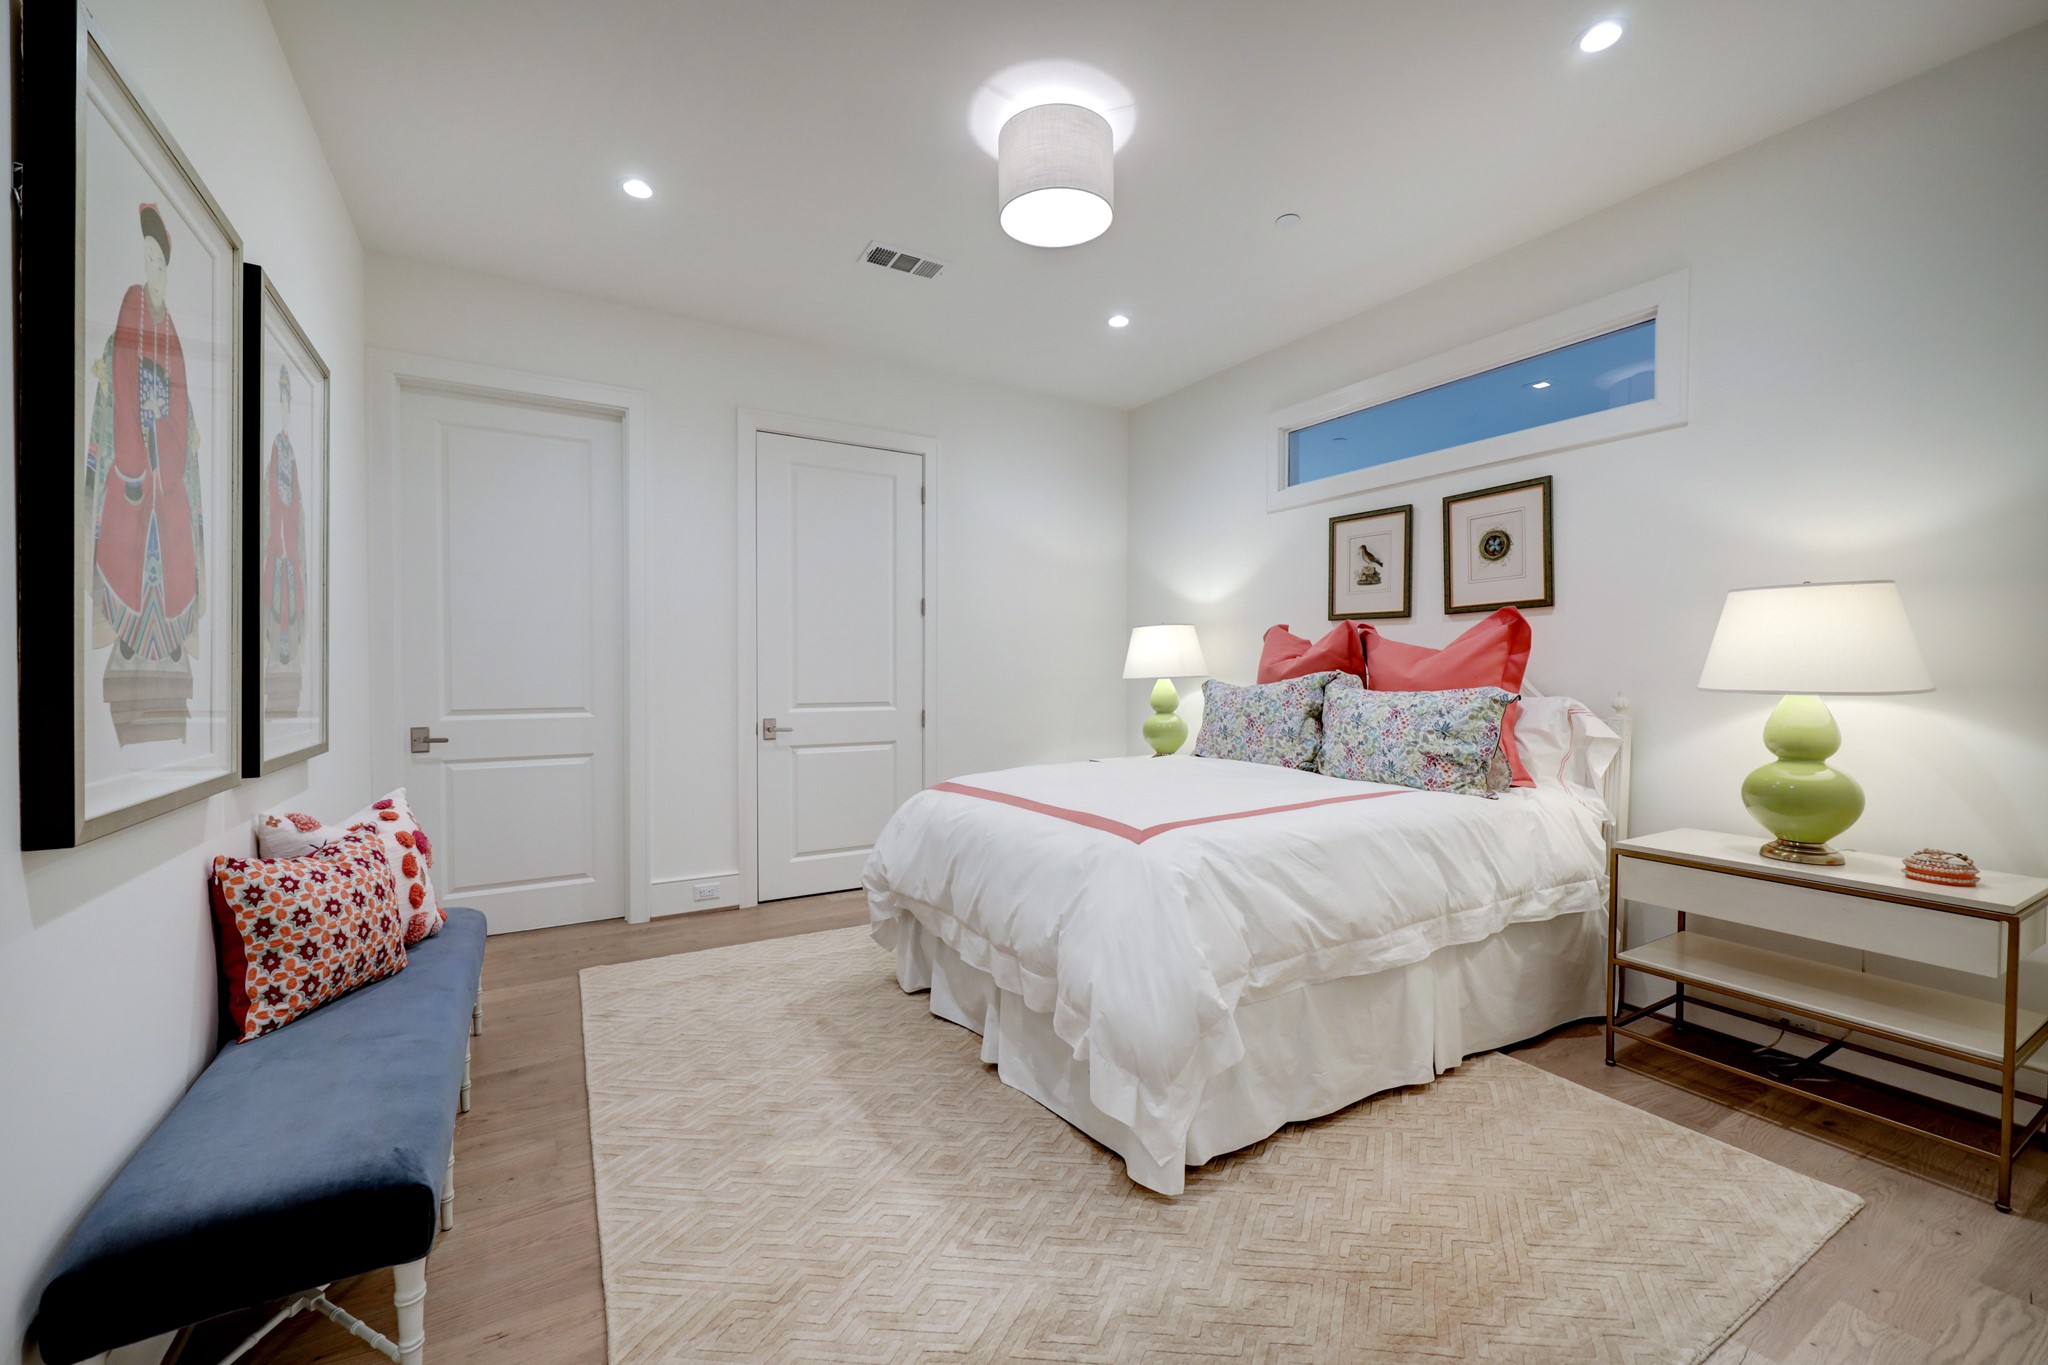 One of three GUEST BEDROOMS - this one (16 X 11) is located just off the Front Hallway and includes hardwood flooring, recessed lighting with central light fixture, walk-in closet with built-in shelving, raised ceiling, 2 windows, shared en suite bath with Guest Bedroom #2.